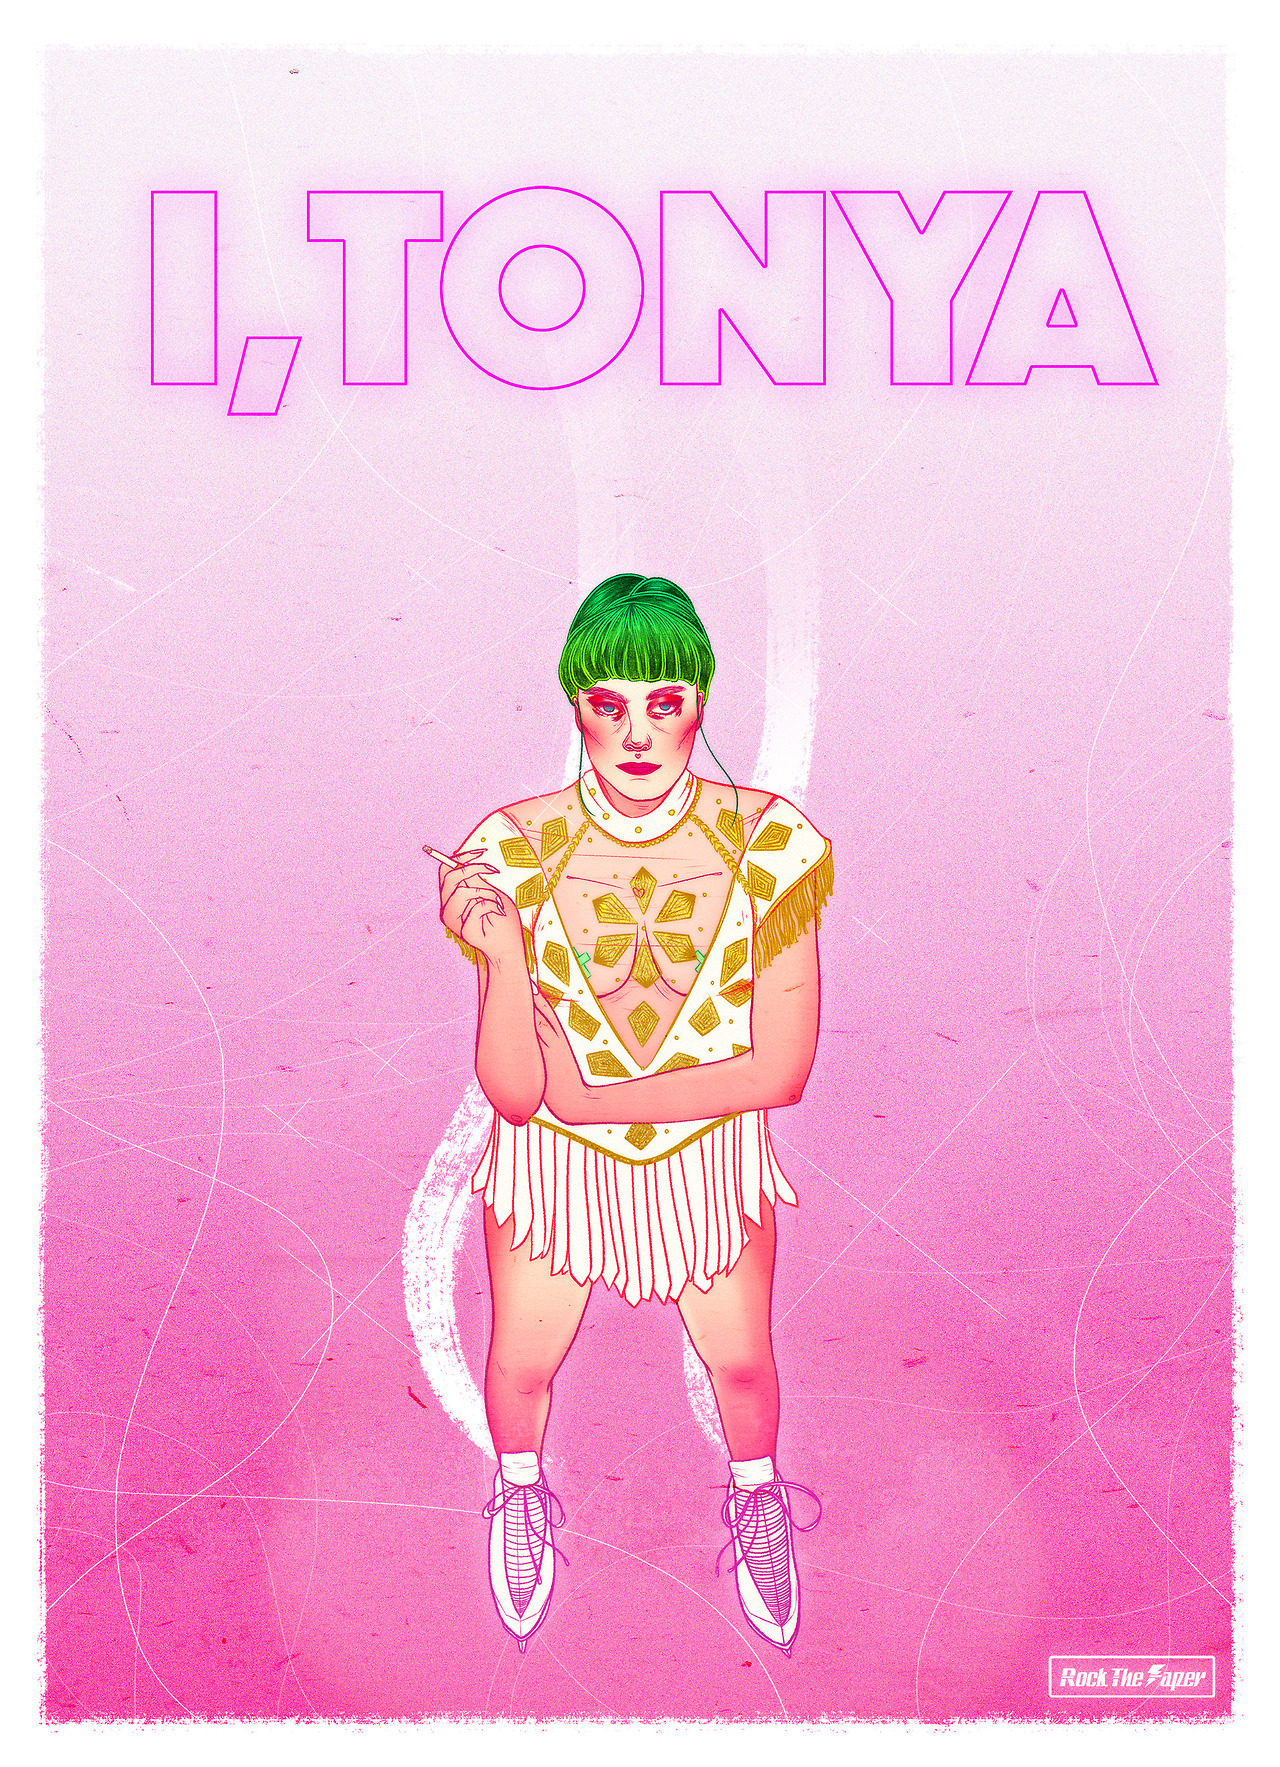 I, TONYA ⛸ Another anticipating movie, a new and exciting breakthrough for @margotrobbie. - Again, neon colors are used to make the whole poster pop out and give it a nostalgic vibe, Tonya didn’t look like this in the movie. - Doing movie poster art...